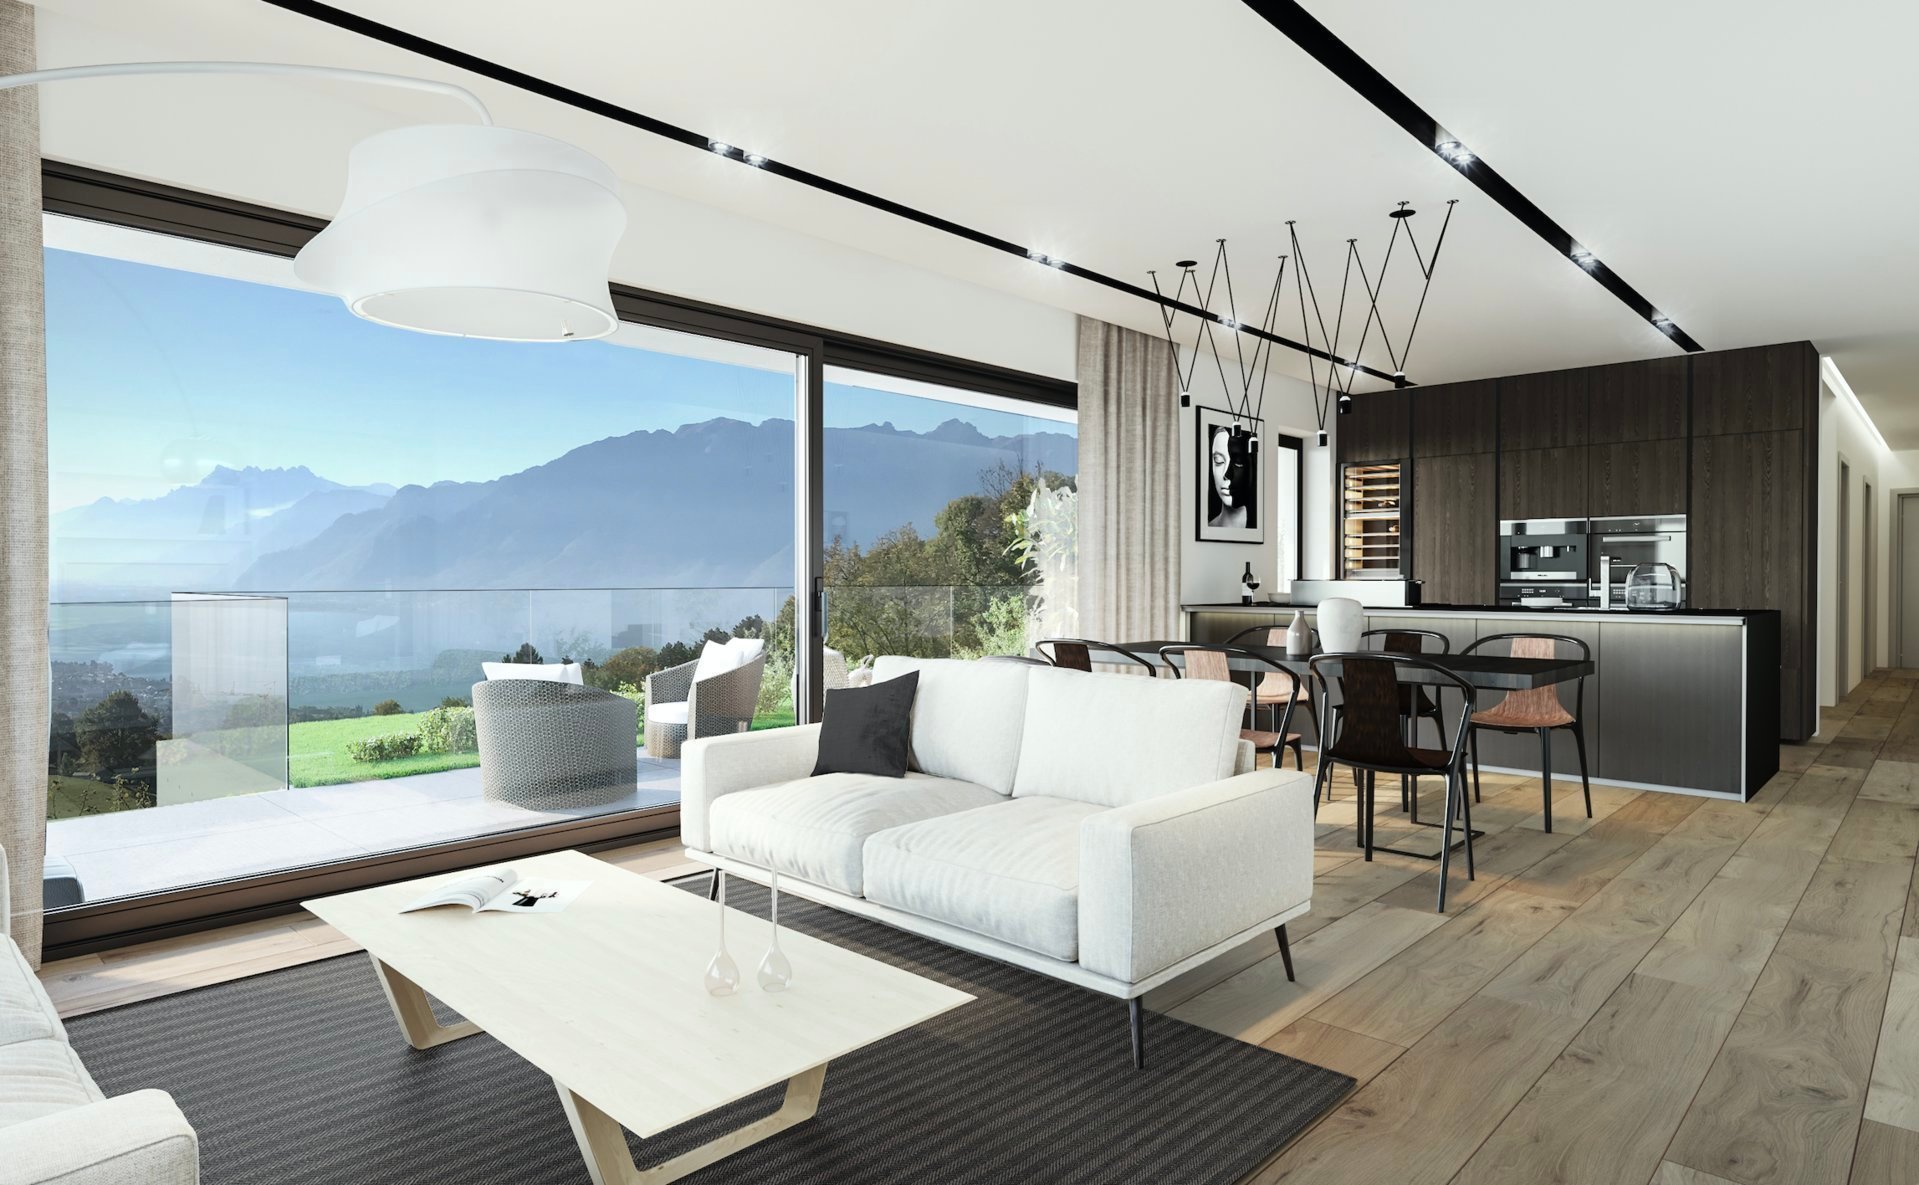 Sale Apartment Vevey In Vevey Switzerland For Sale 10924096